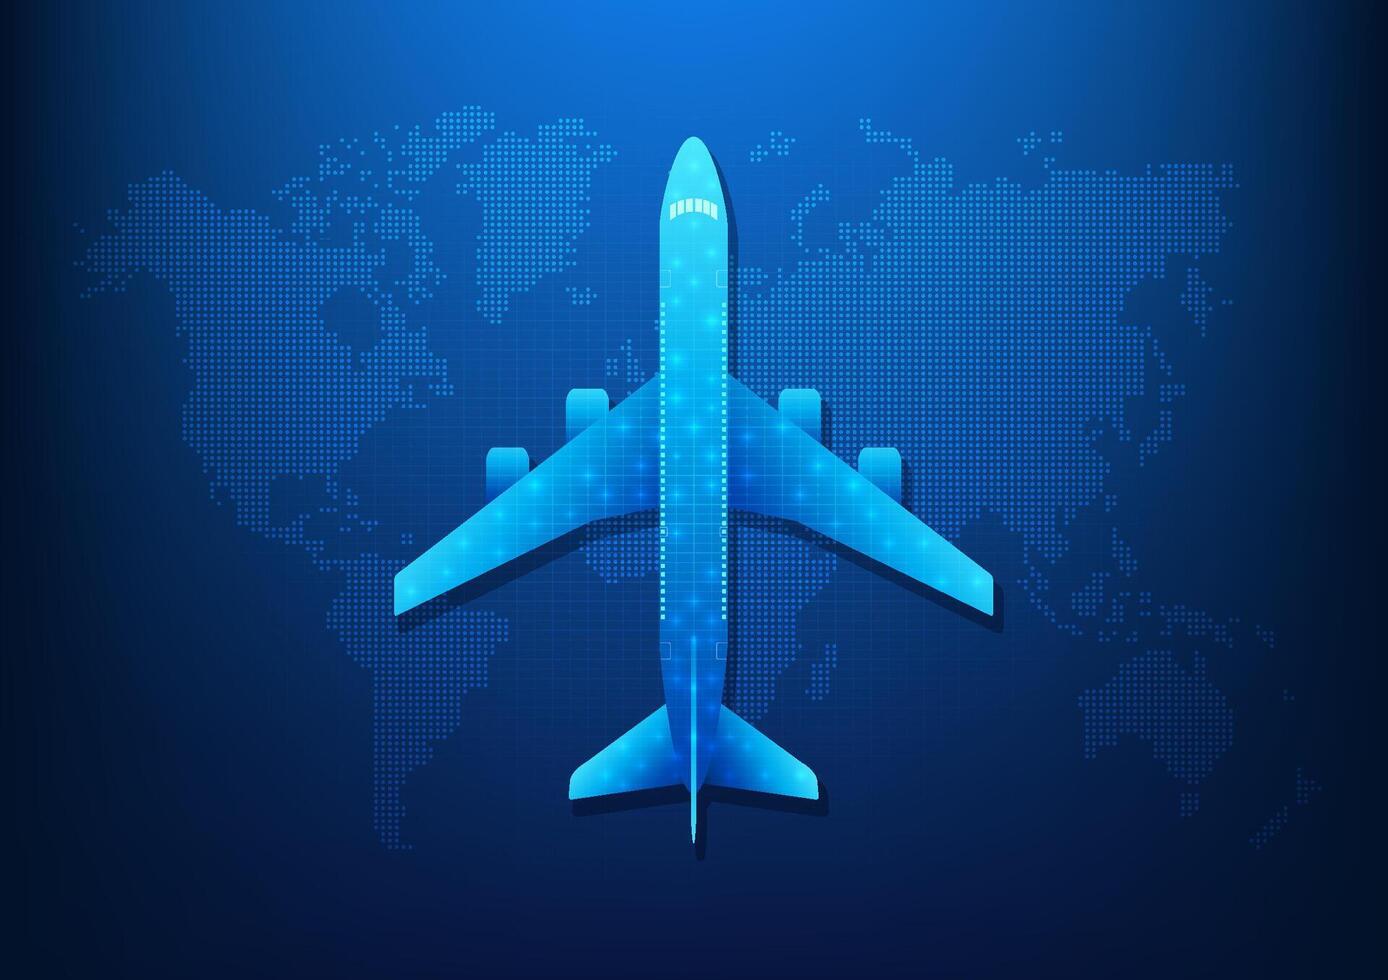 Air transportation industry technology that uses airplane as transport vehicles that has AI technology to help manage and specify the location of the destination Airplanes flying on the world map vector